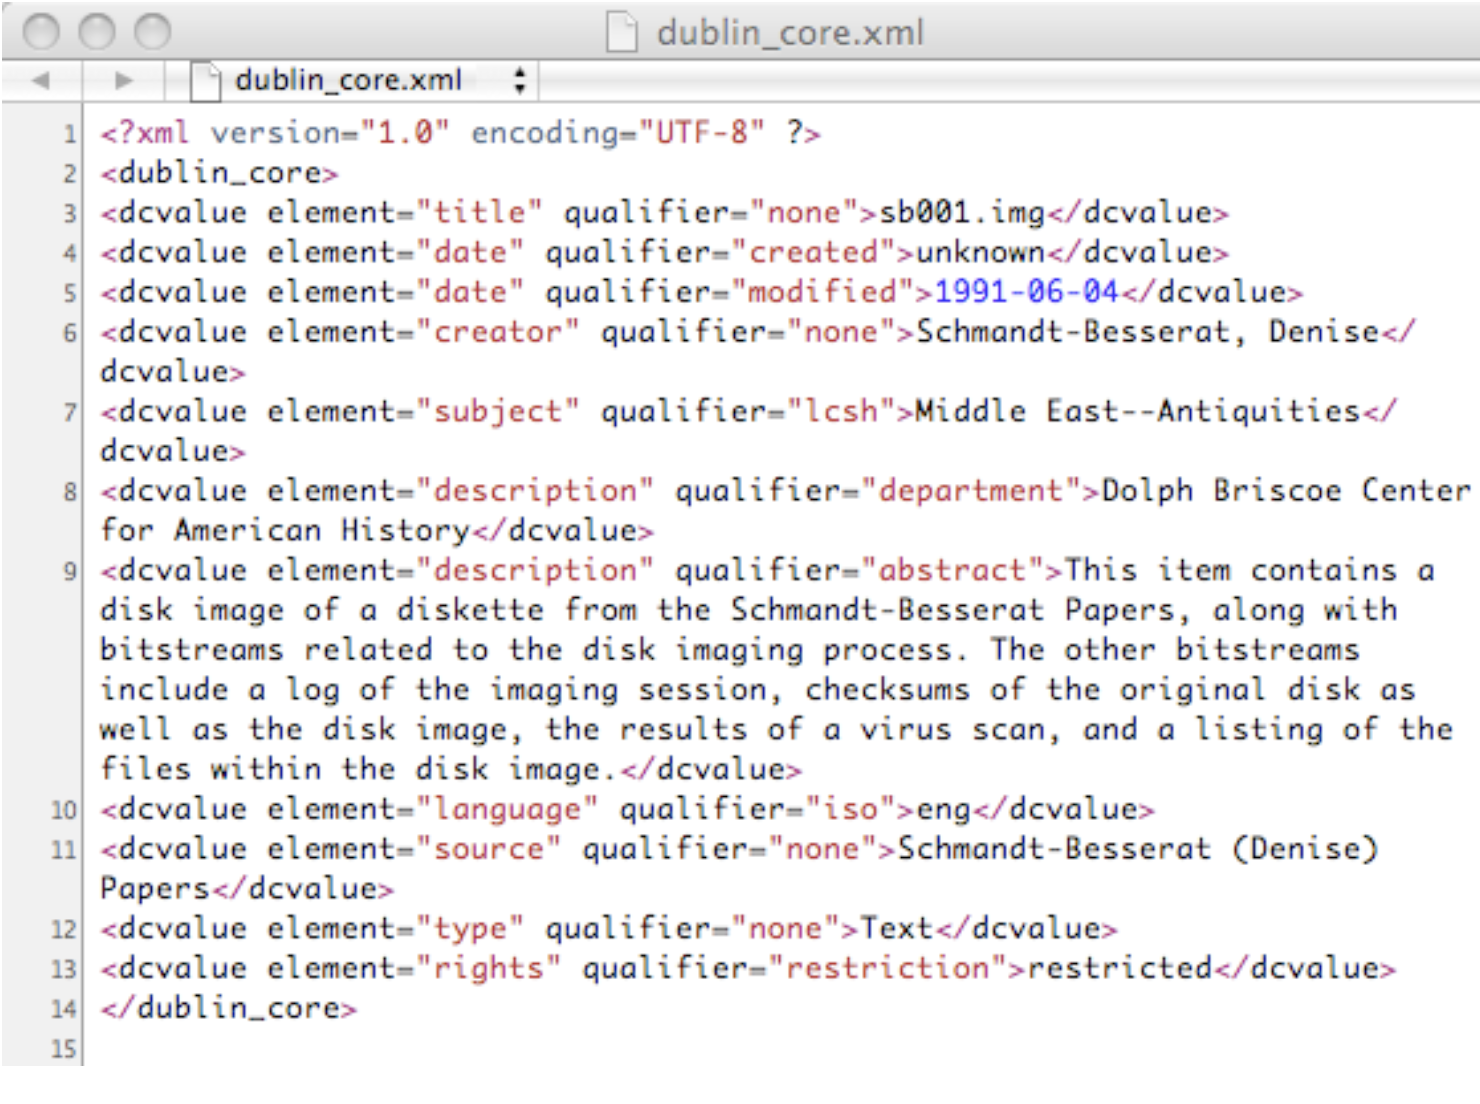 Screenshot of xml describing a disk image created during work on the Schmandt-Besserat Papers in group project for course on 'Problems in Long-Term Preservation of Electronic Records'